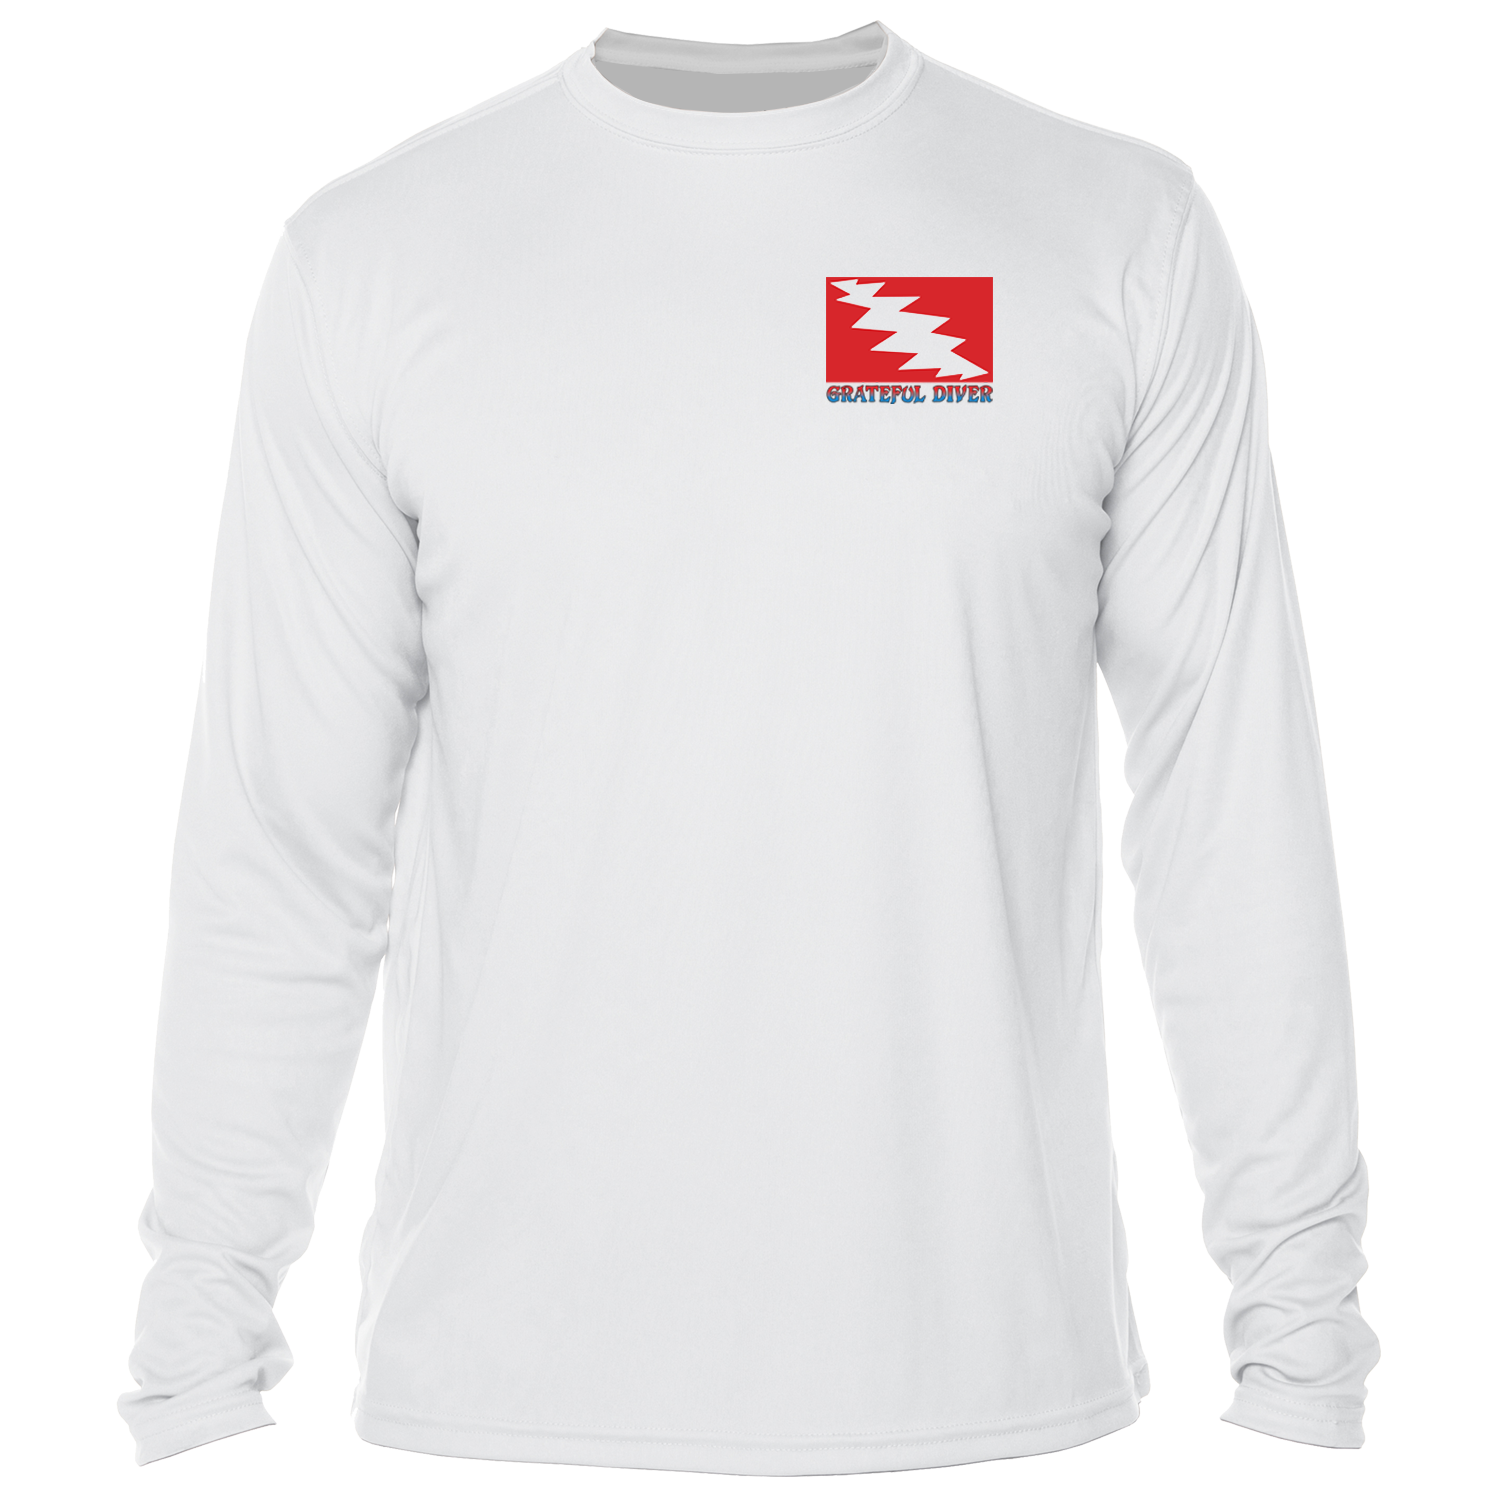 front of the Grateful Diver's Artist's Collection: Captain's Corner UV Shirt in white showing the classic dive flag logo